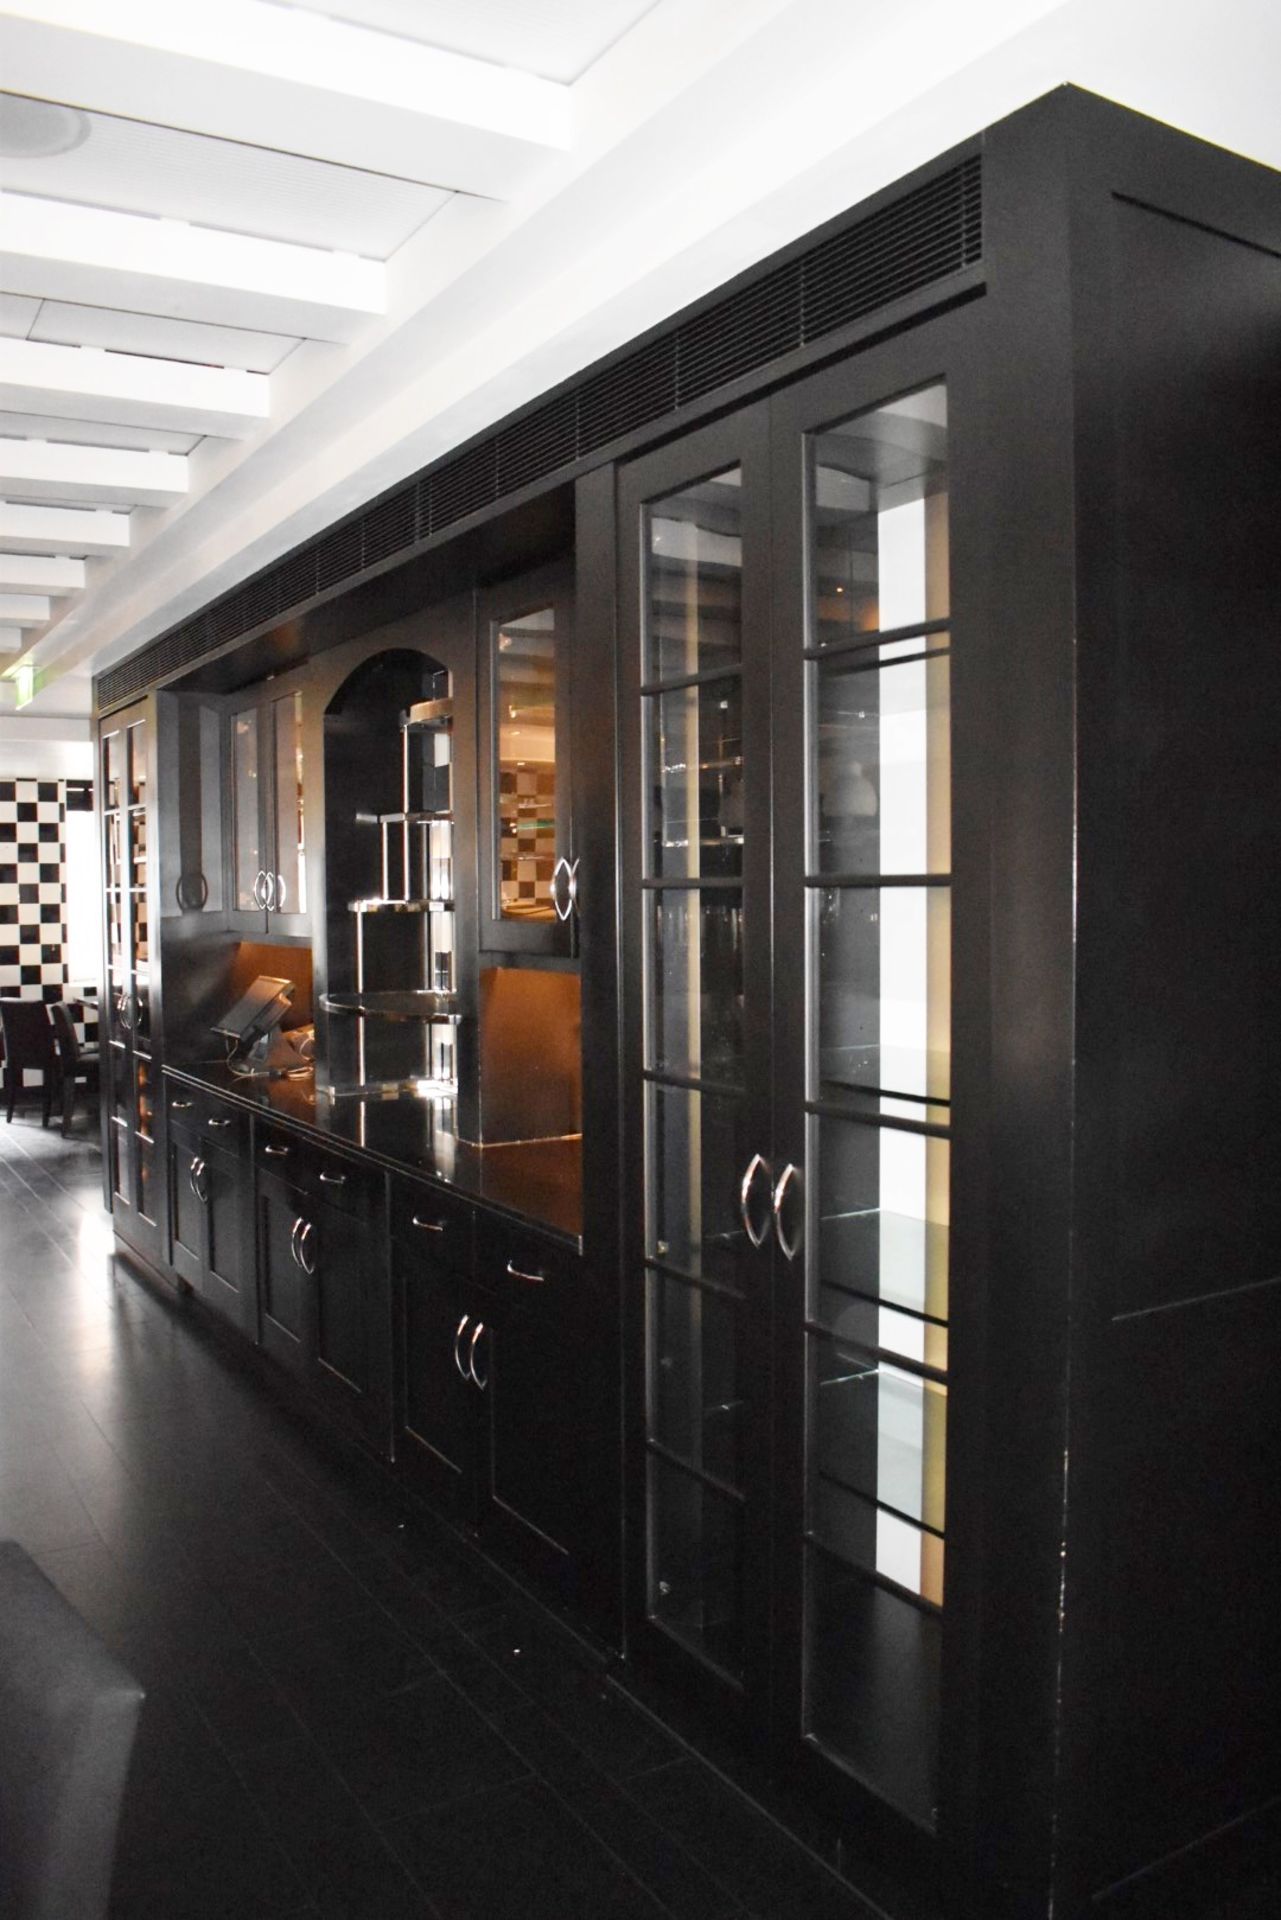 1 x Large Wall Dresser / Server Cabinet in Black - Features Epos Stations, Display Cabinets, Storage - Image 7 of 7